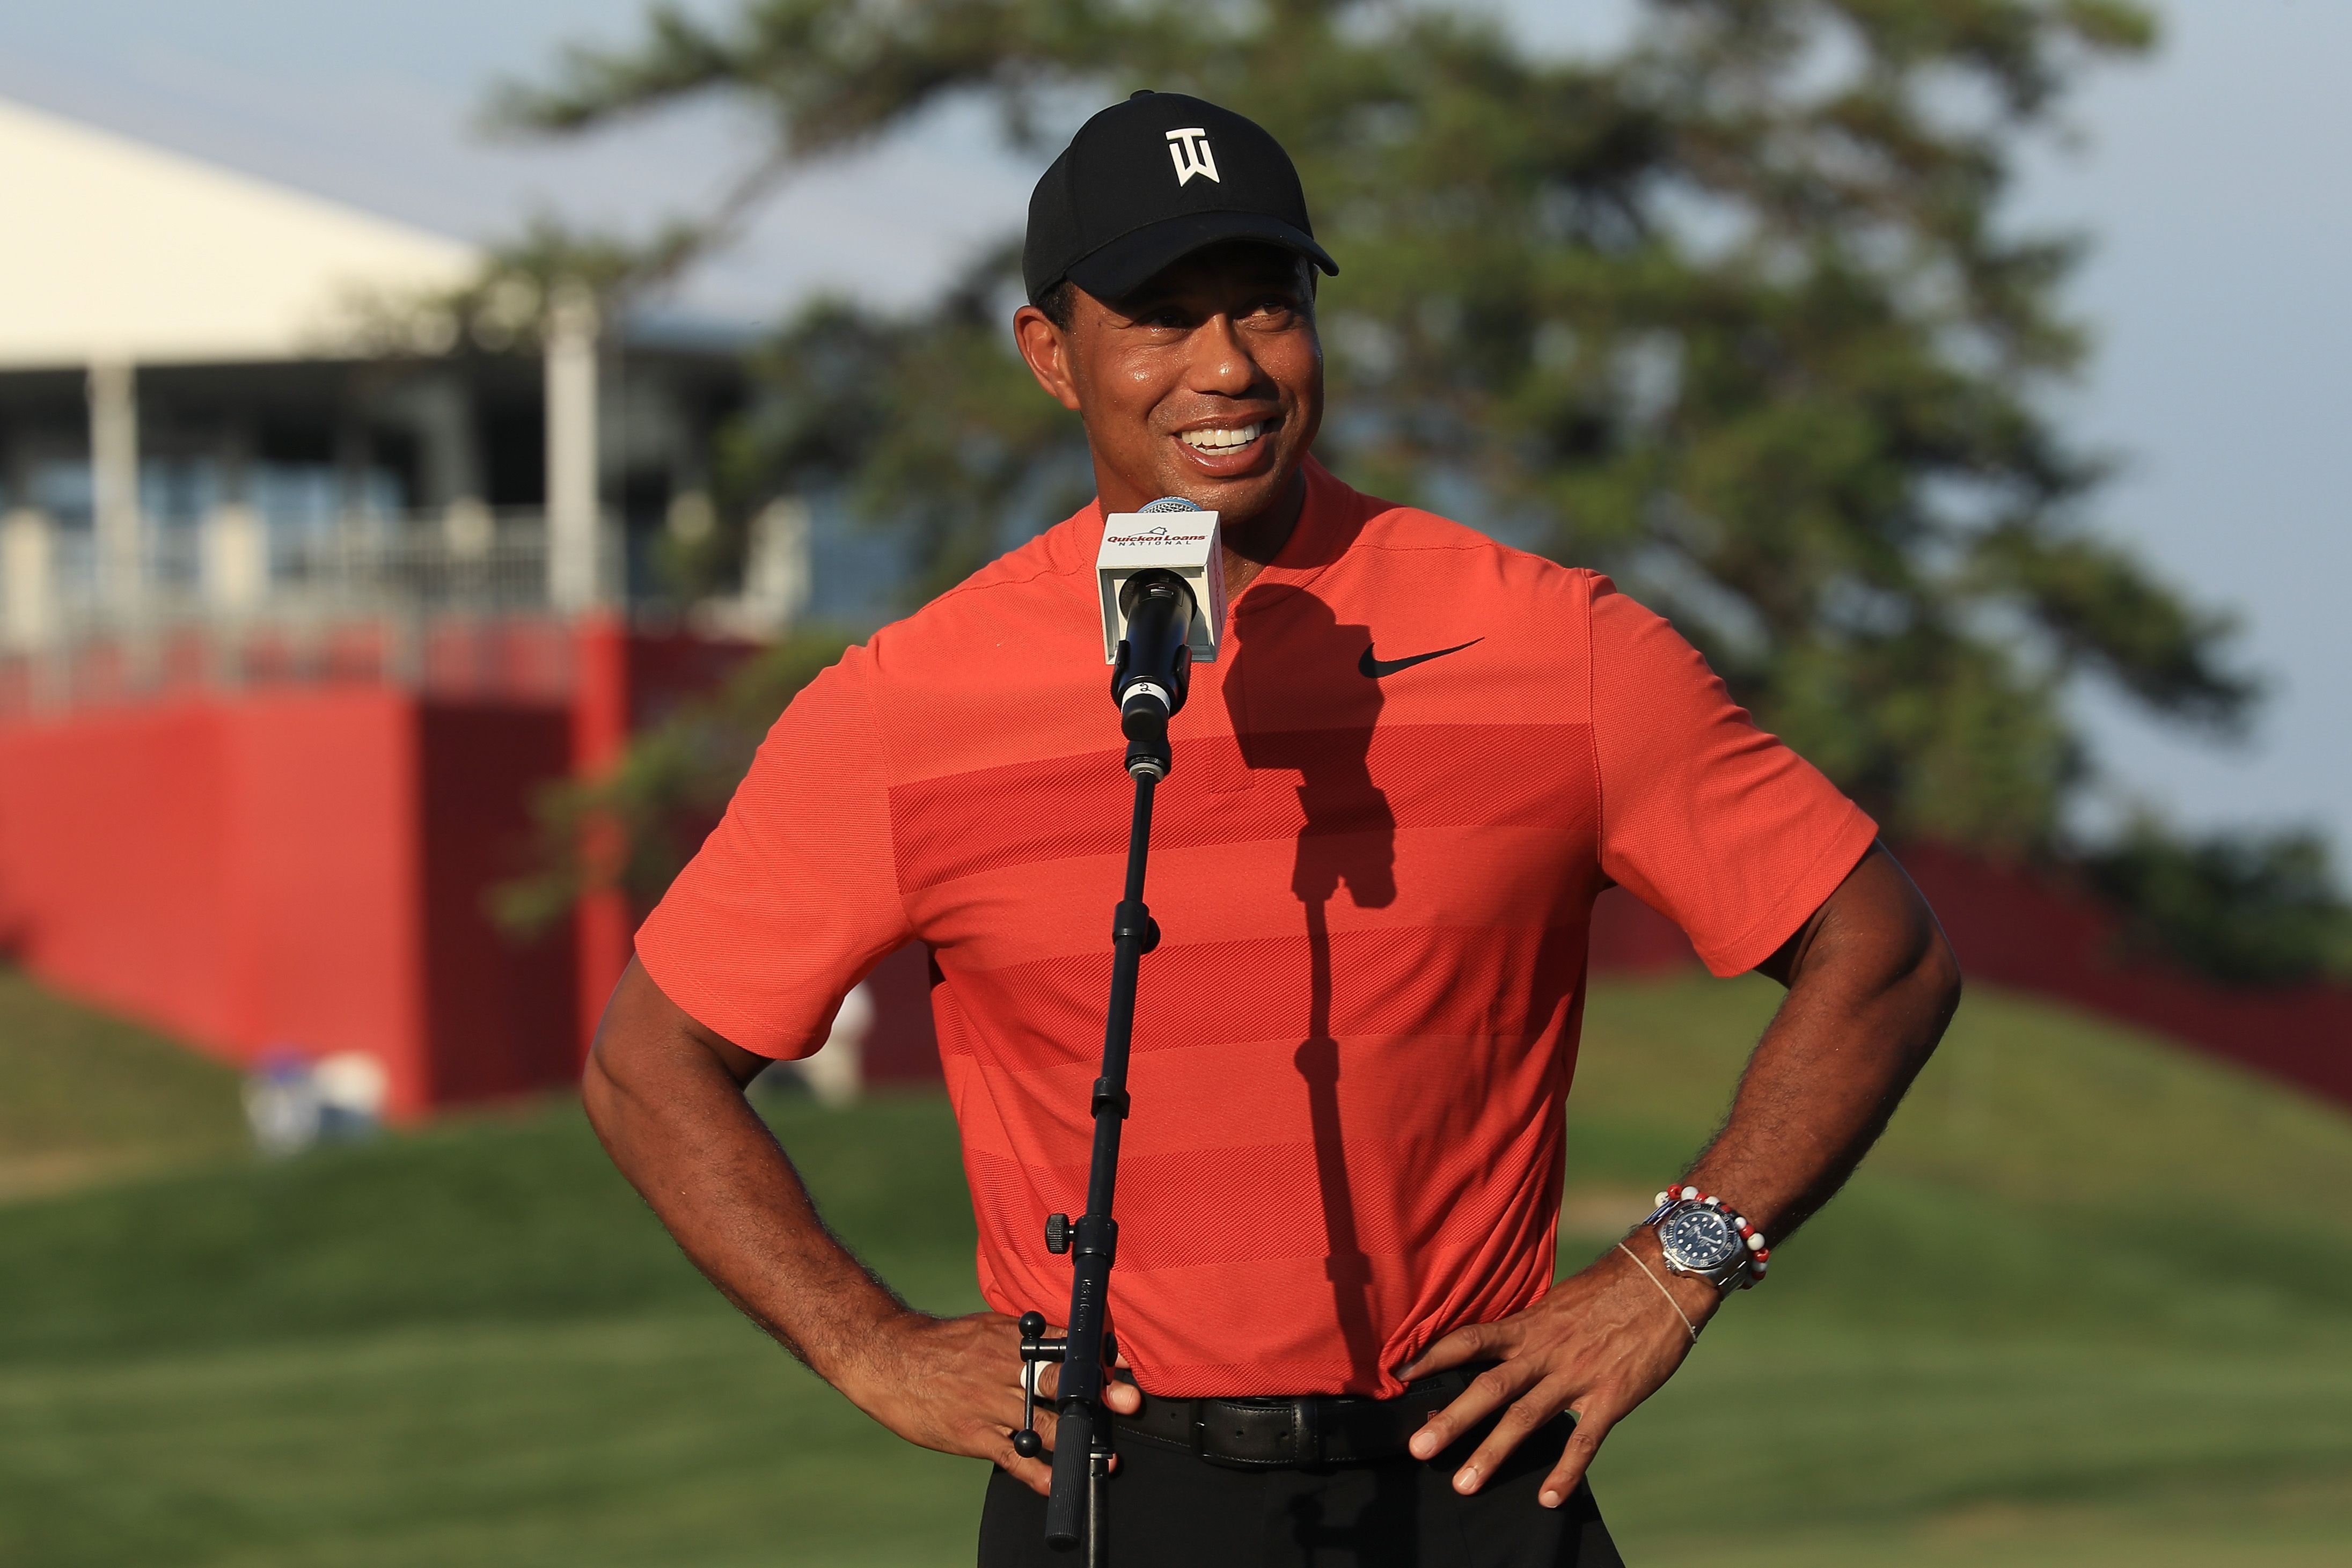 Tiger Woods during the trophy presentation at the Quicken Loans National at TPC Potomac on July 1, 2018 in Potomac, Maryland. | Source: Getty Images